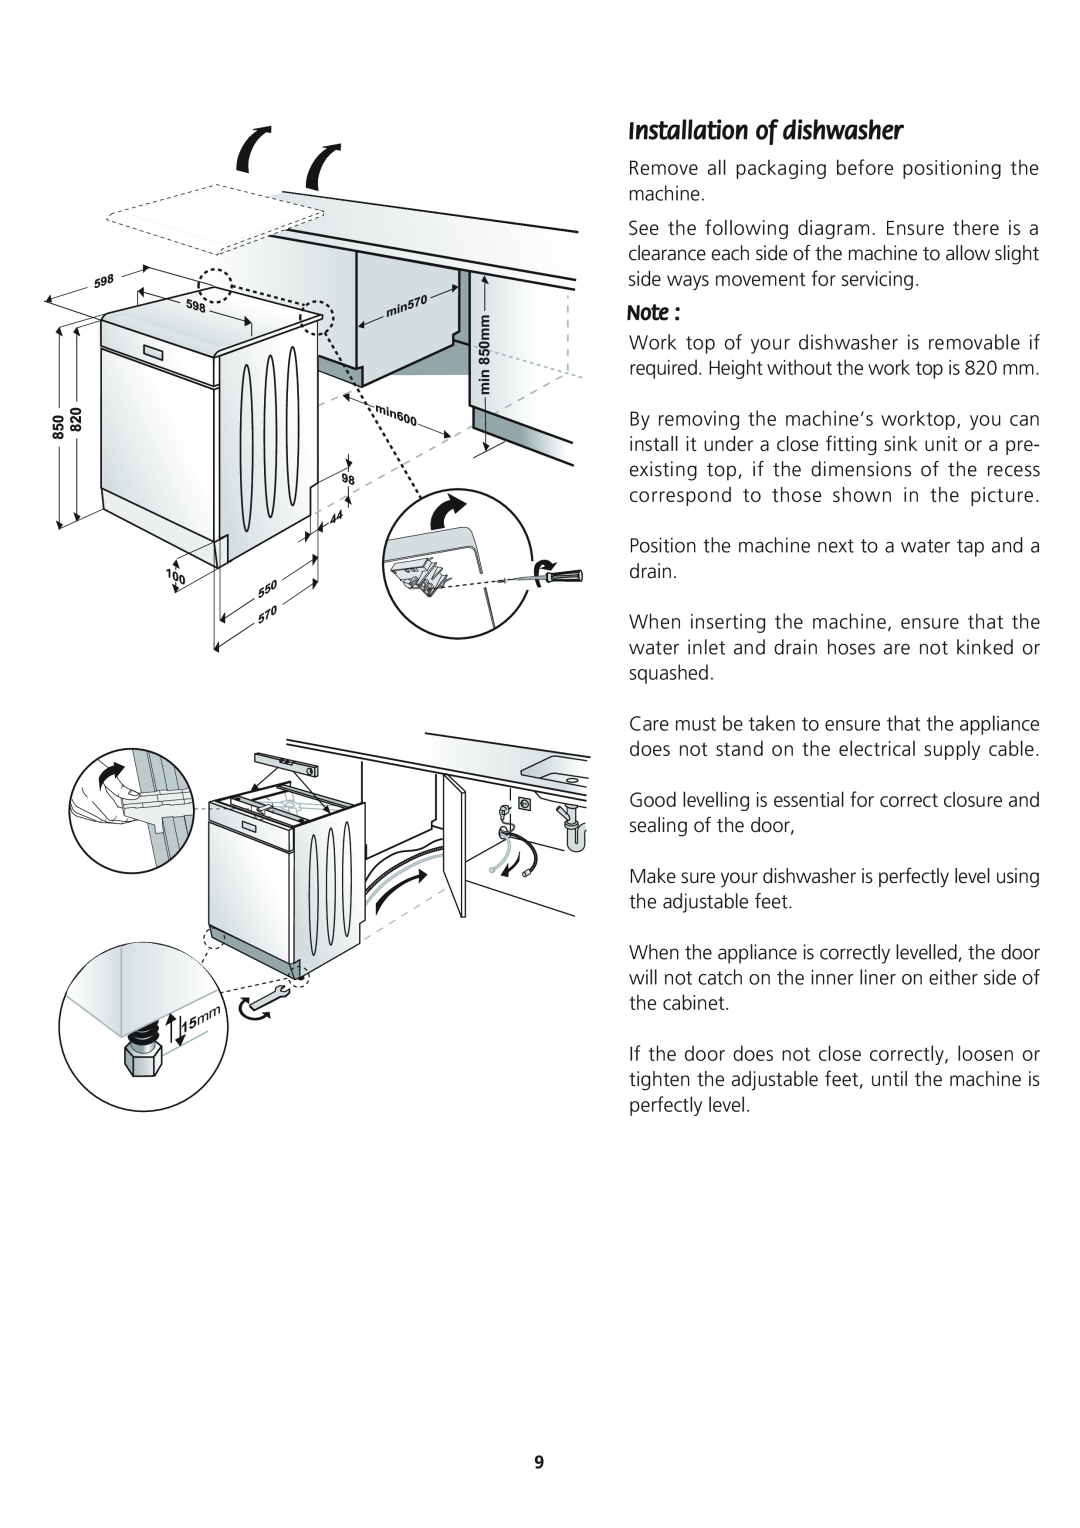 Beko DWD 8657 manual Remove all packaging before positioning the machine 